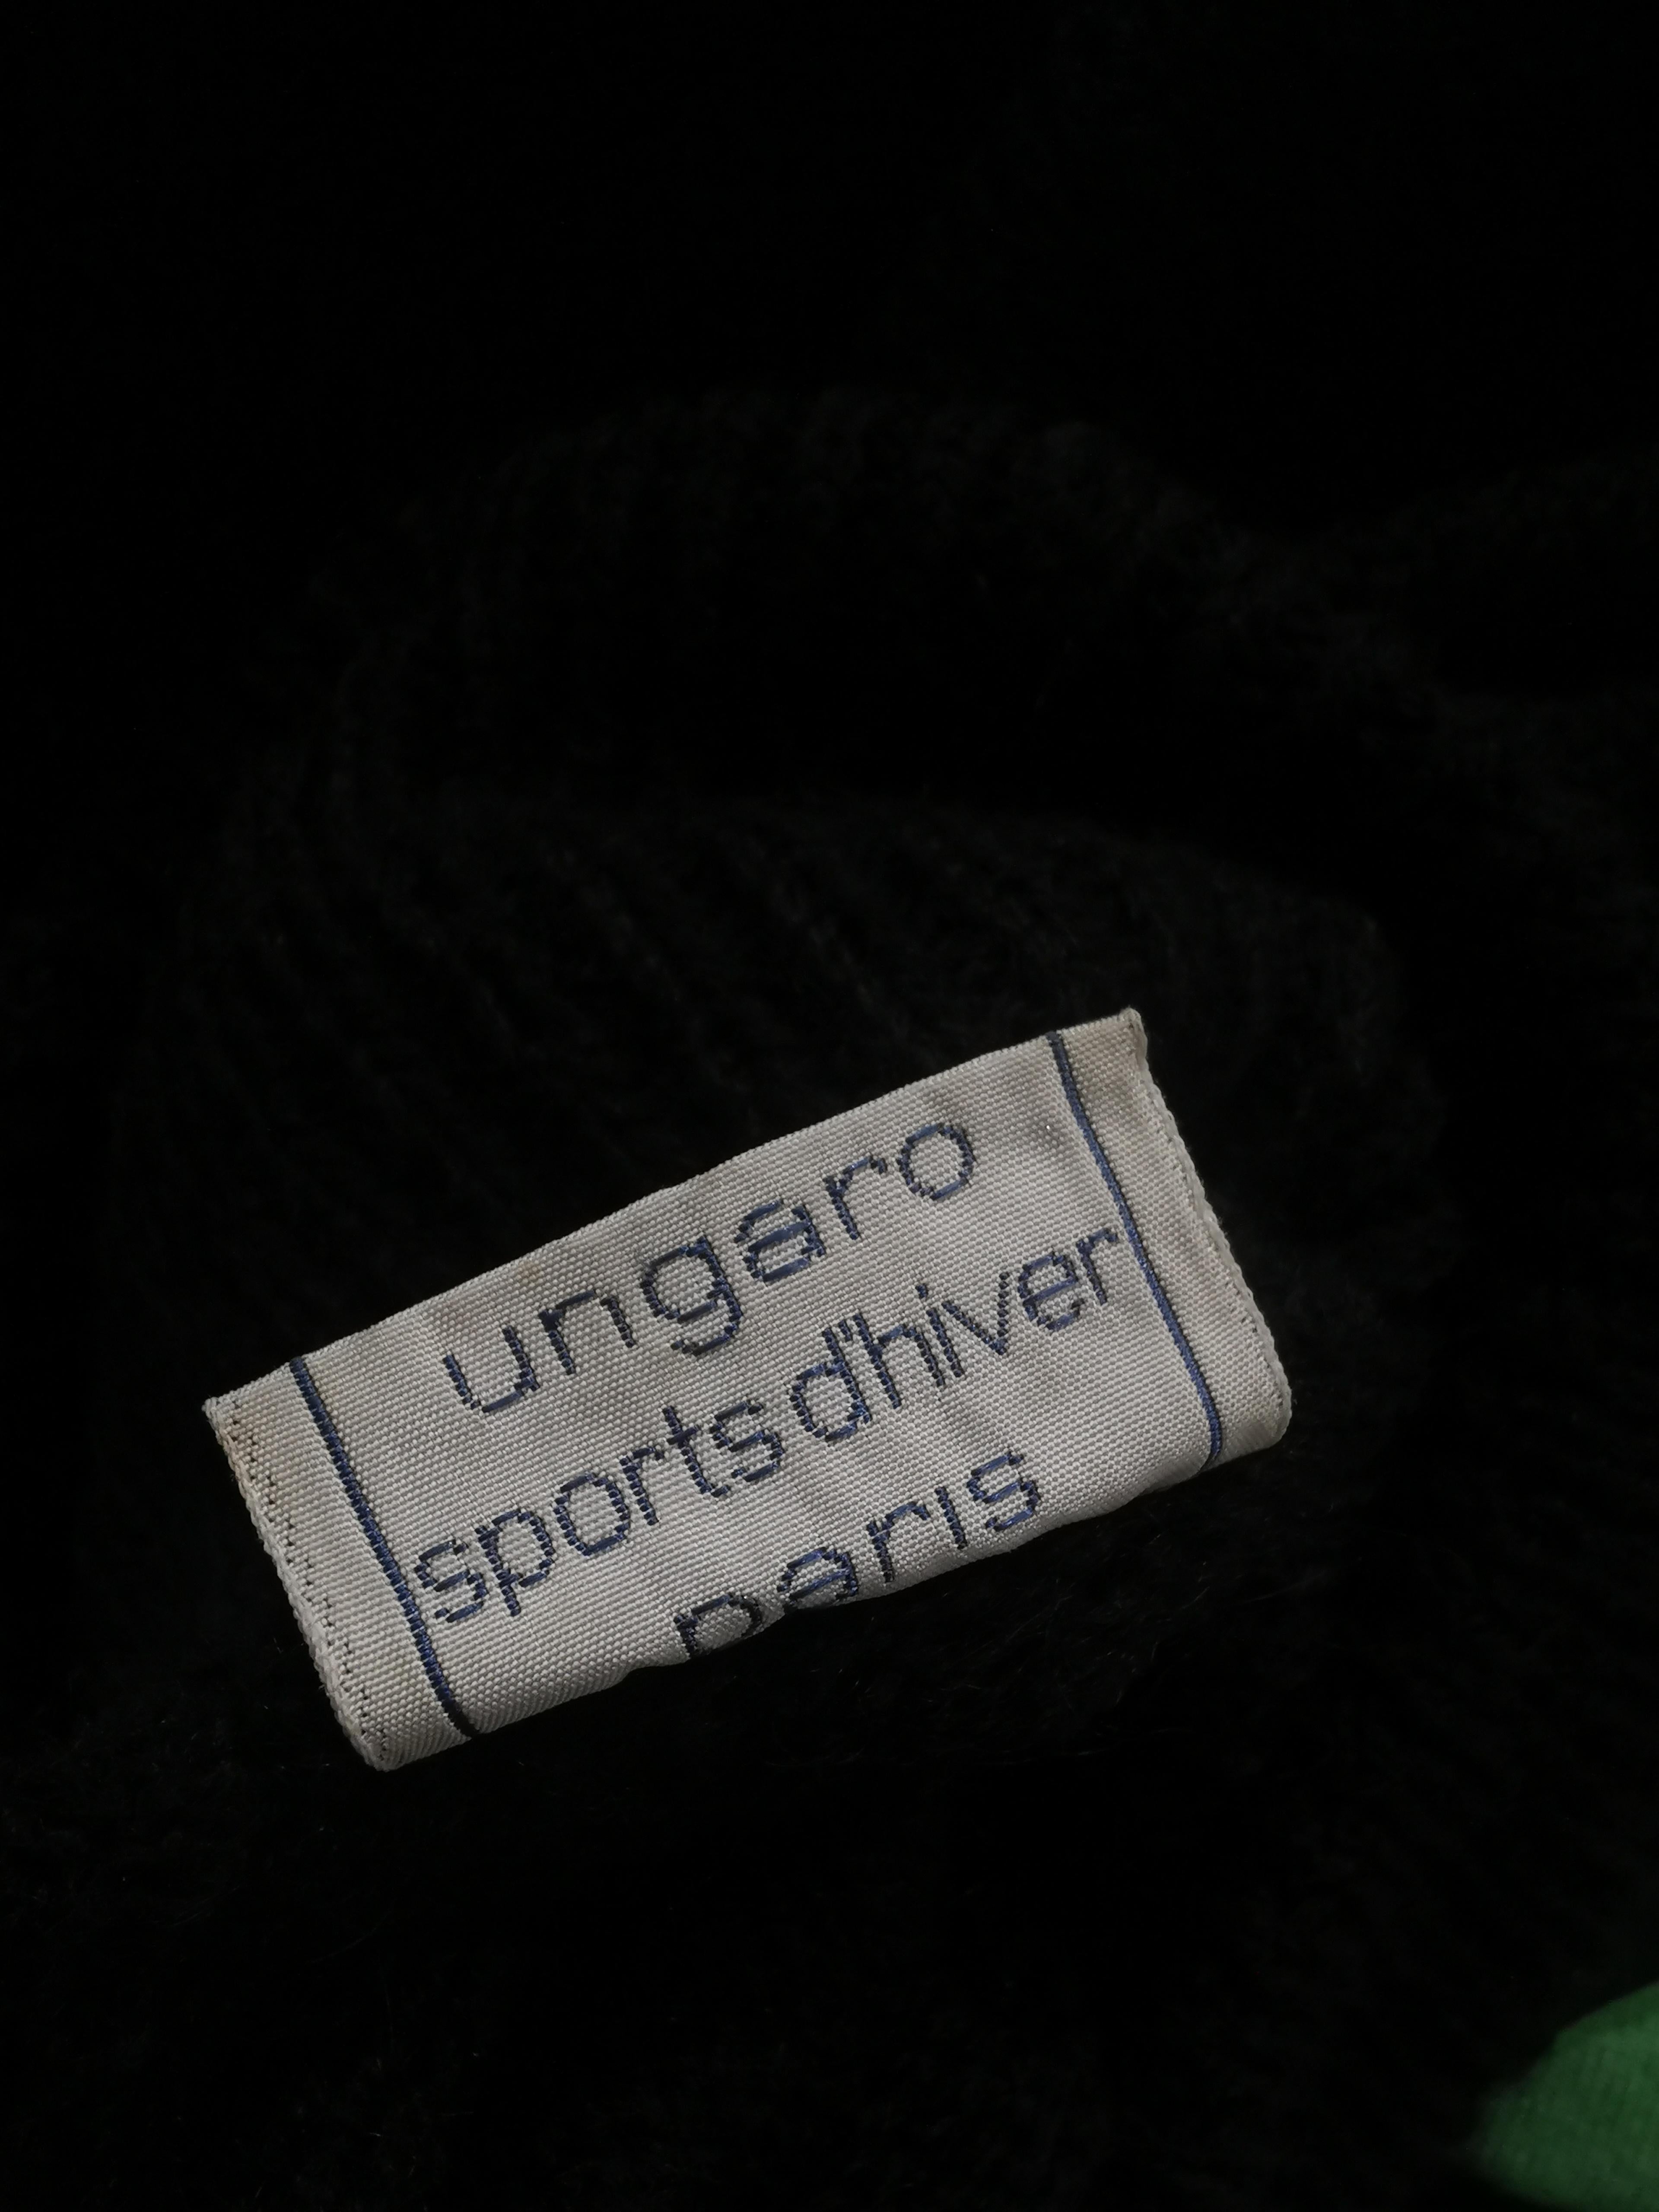 Ungaro Sports d'Hiver sweater For Sale 3